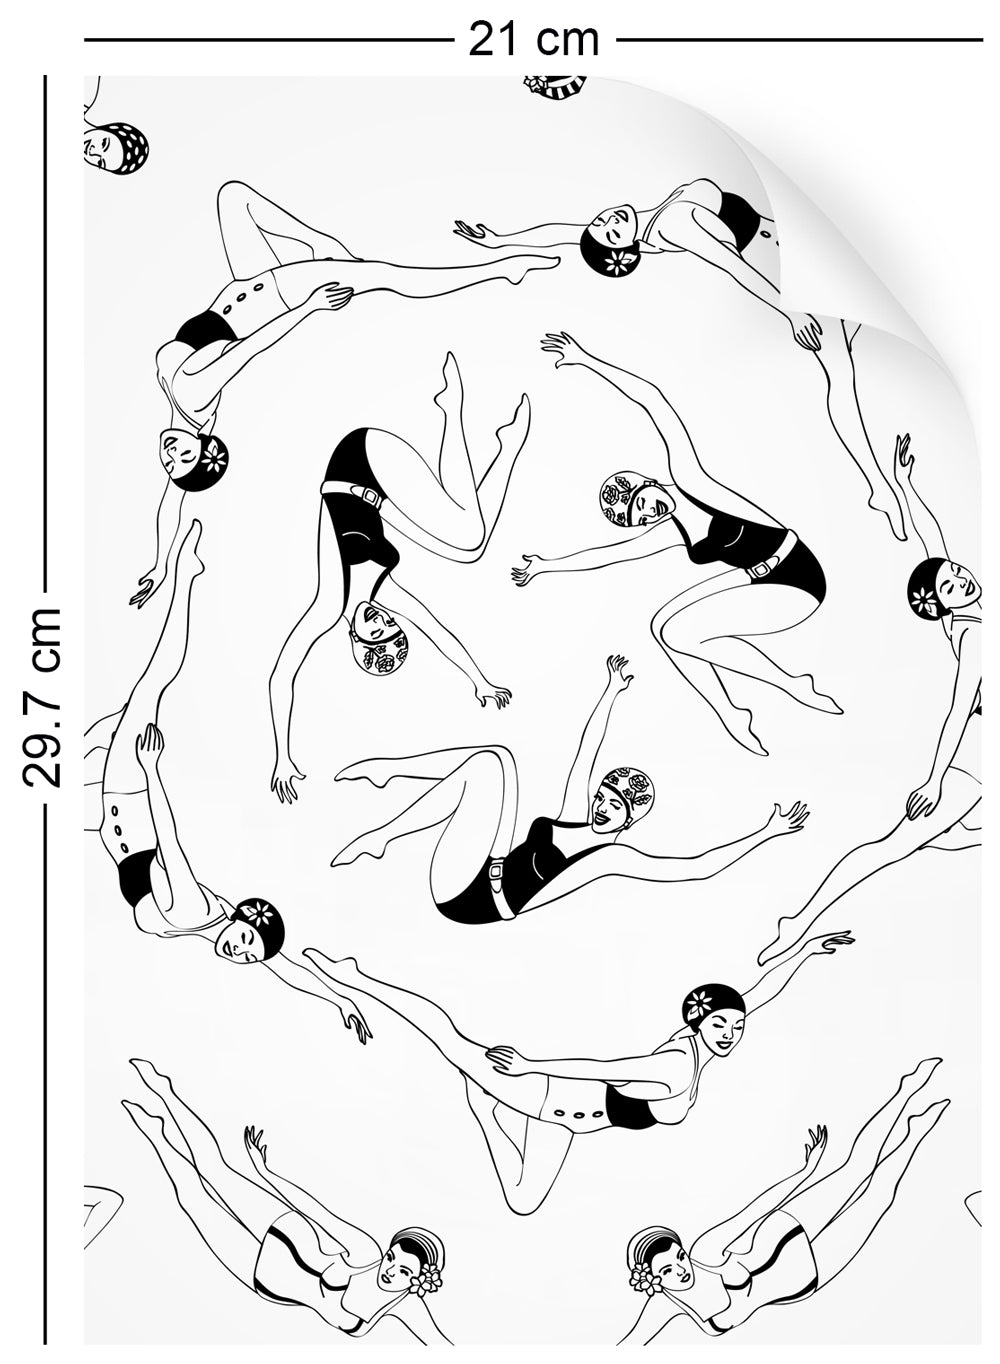 a4 wallpaper swatch with synchronised swimmer design in monochrome